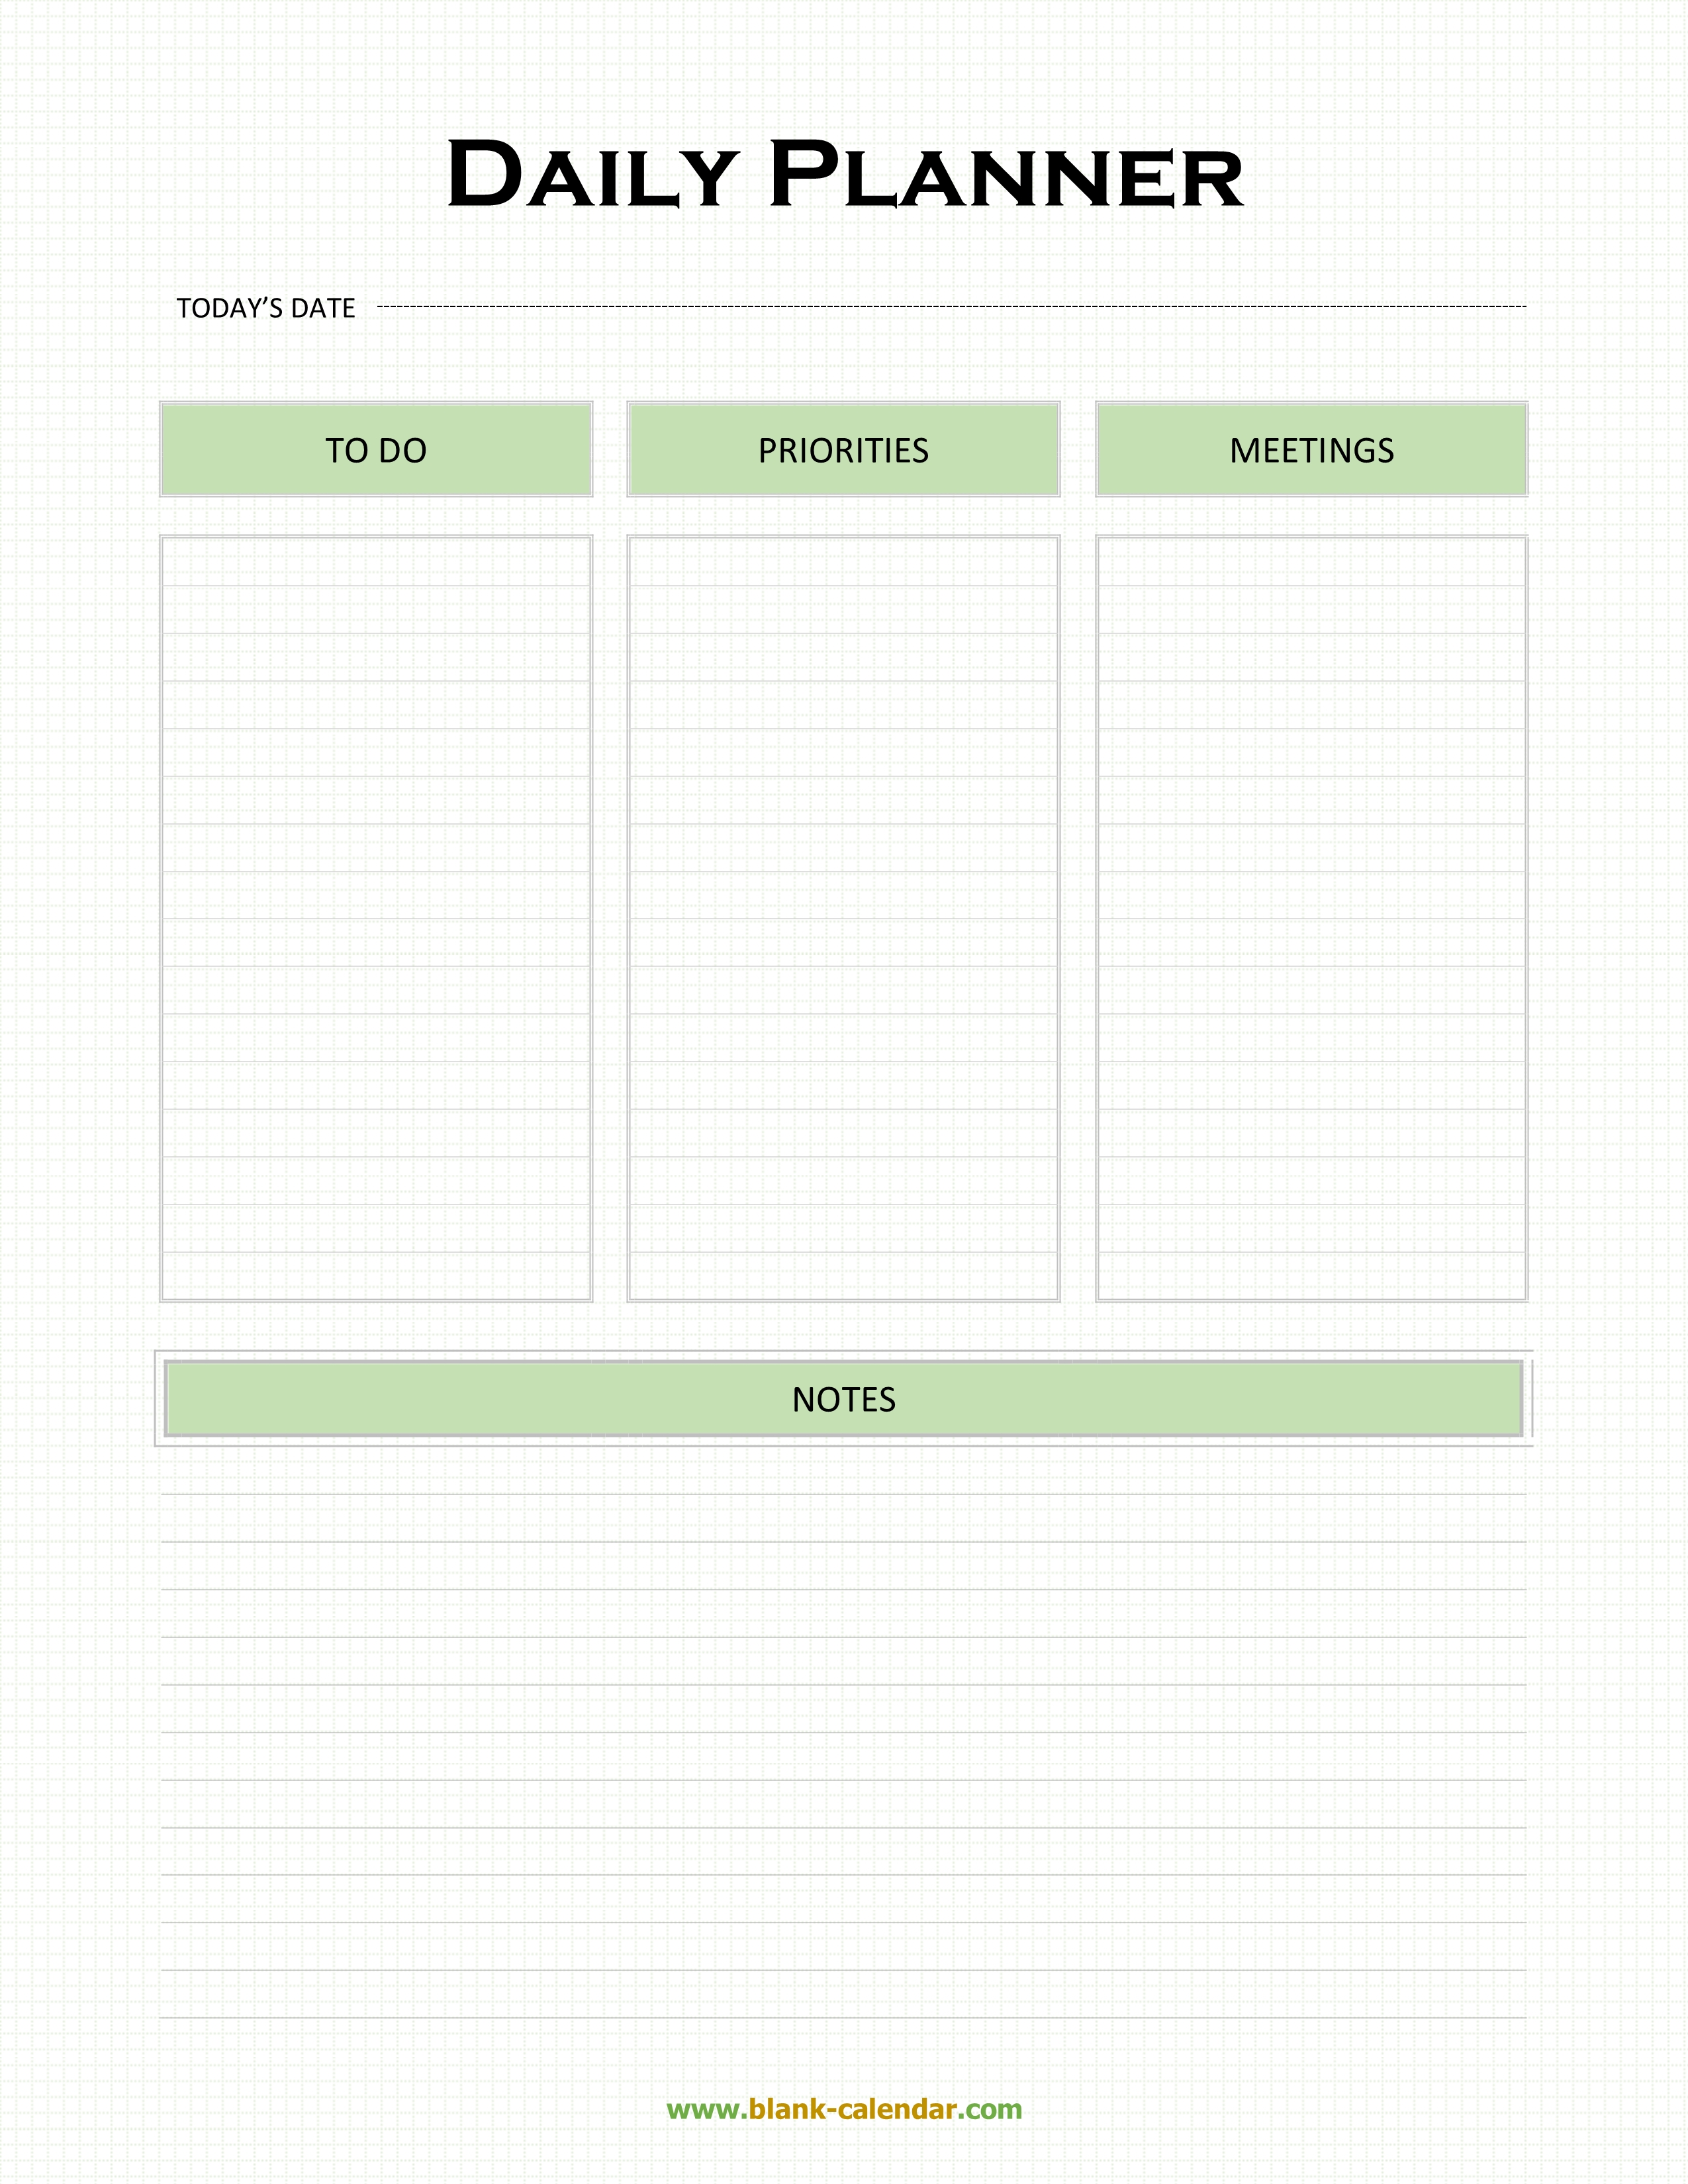 Microsoft Word Planner Template For Your Needs